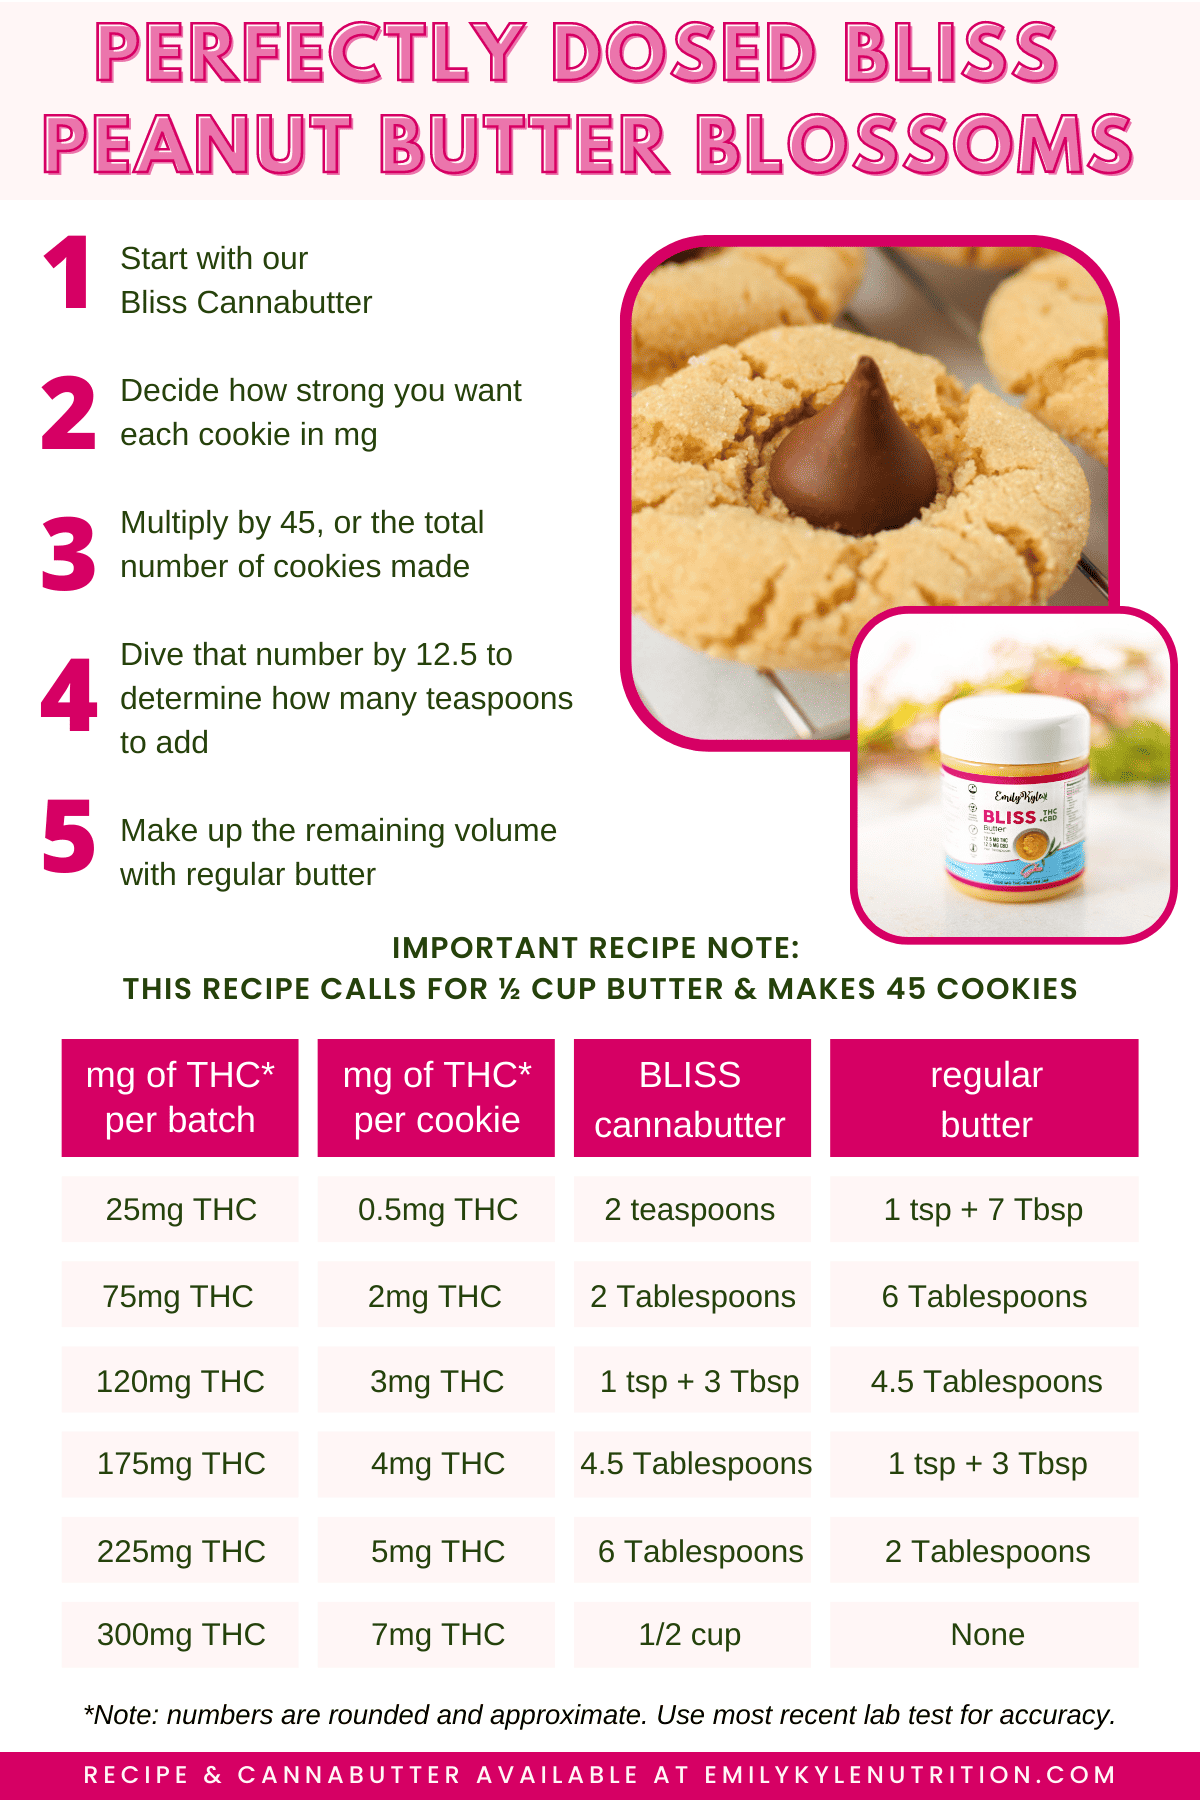 A chart showing how to dose Bliss Cannabutter to make cannabis peanut butter blossoms.